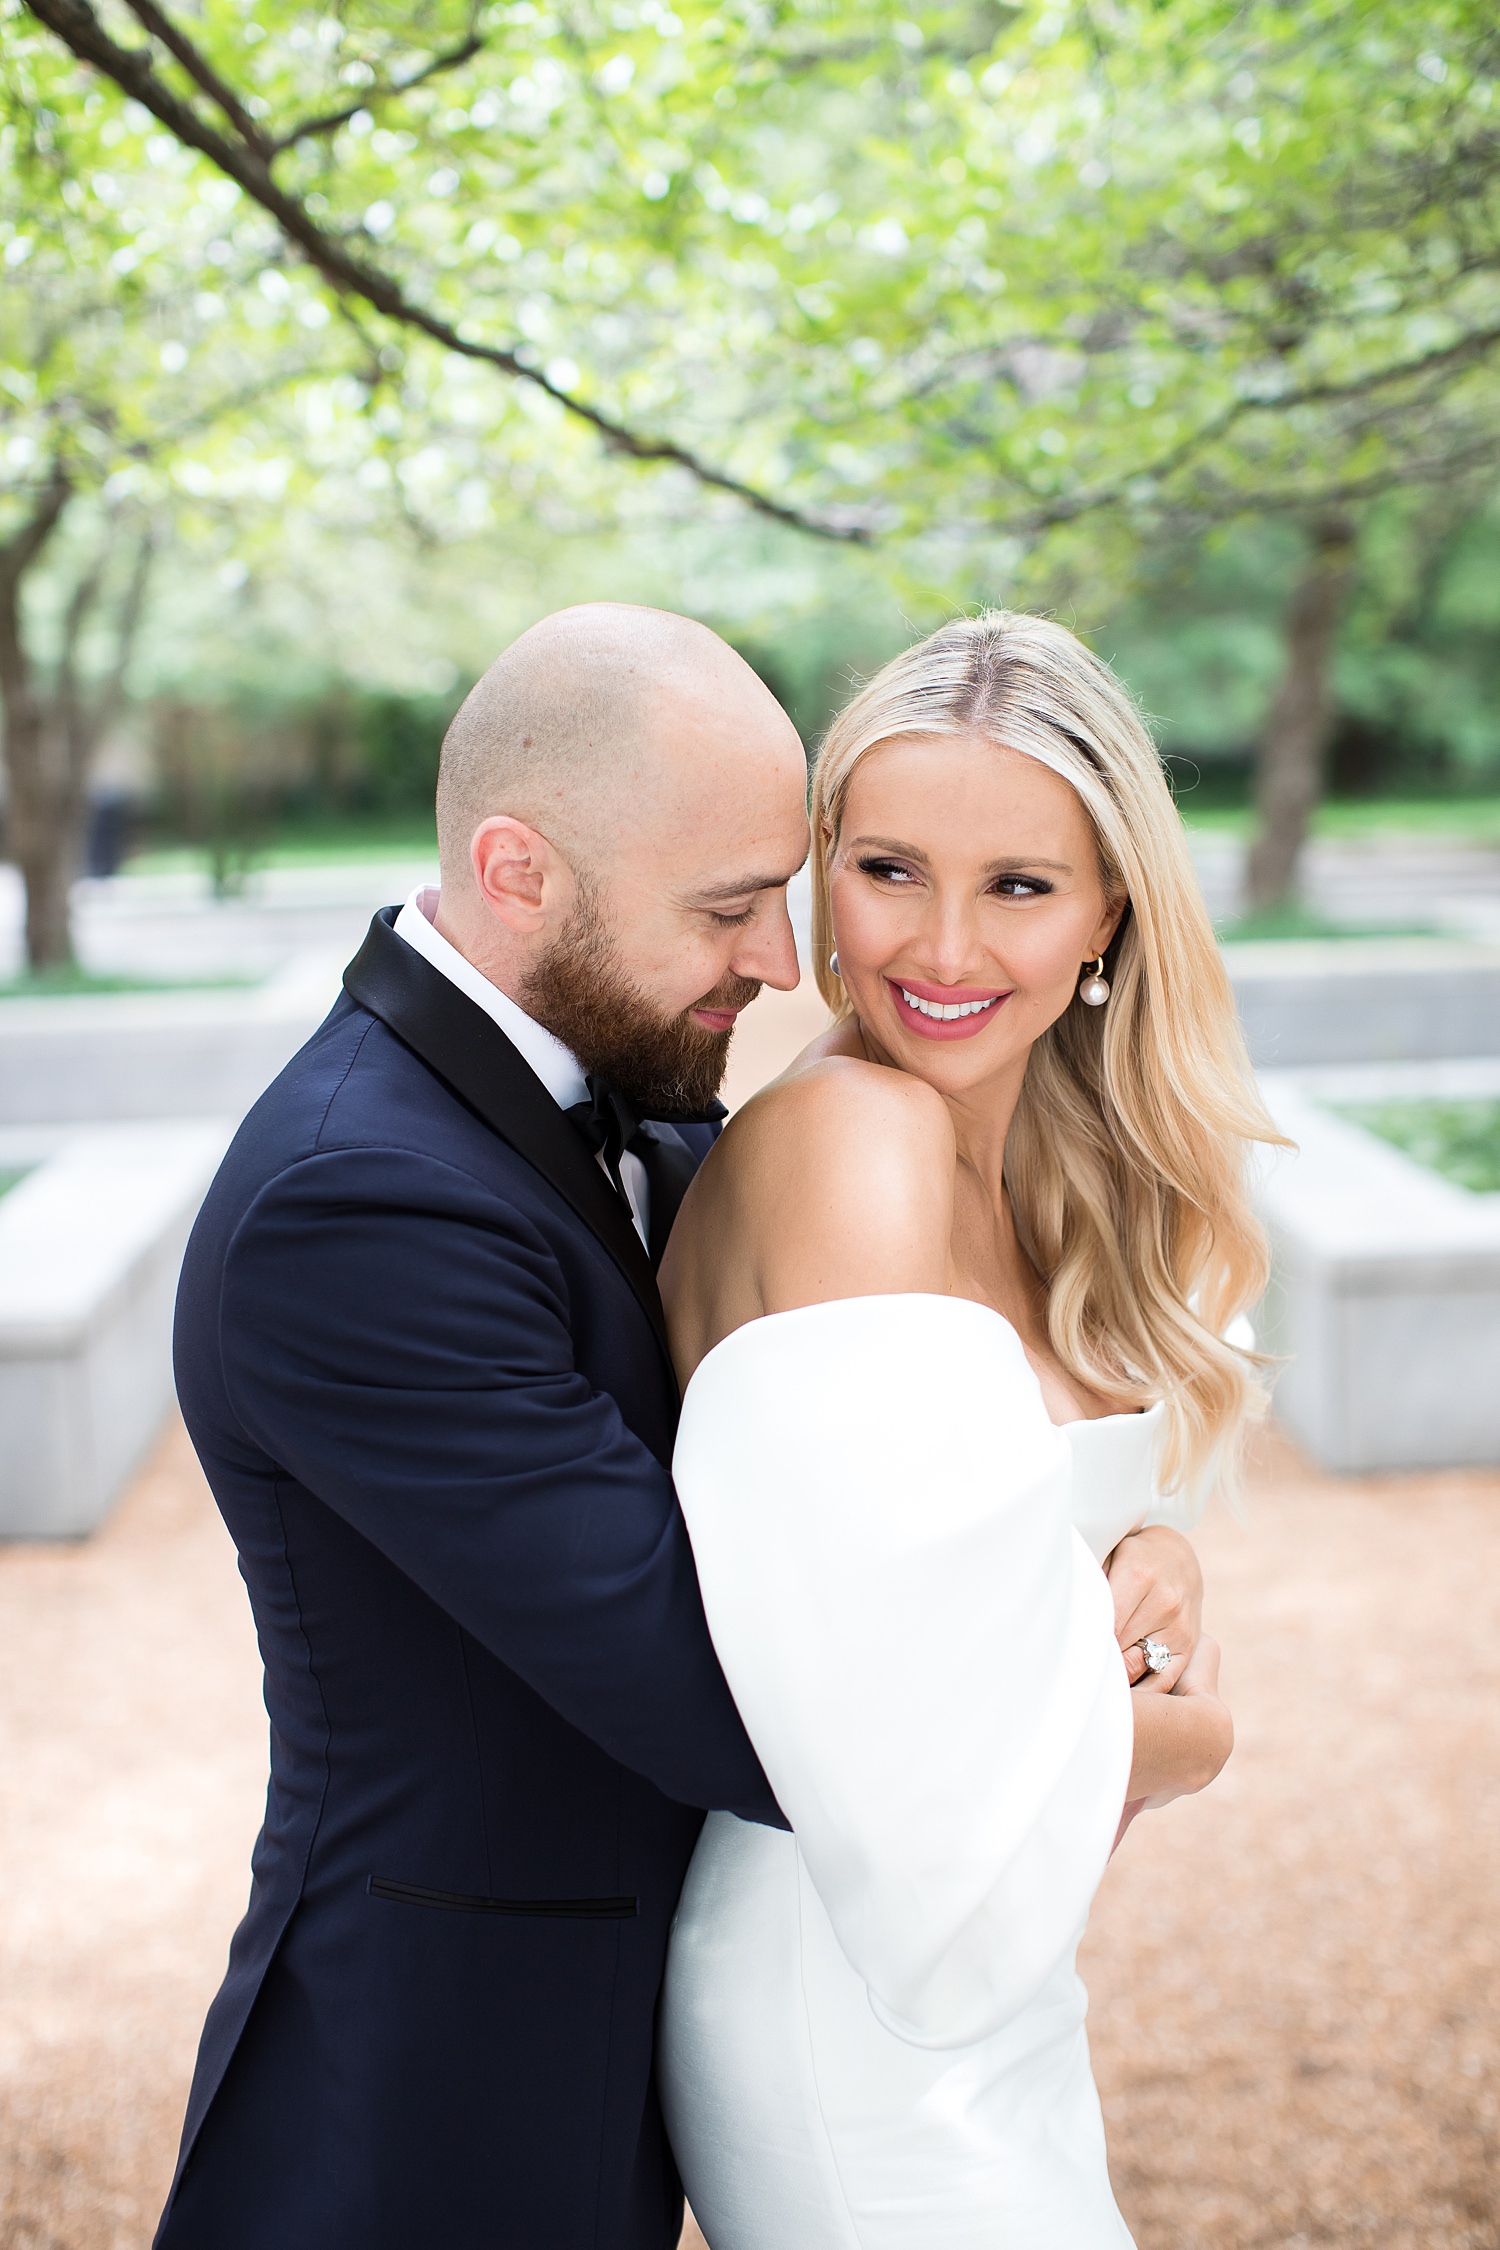 Marta and Nick celebrate their Chicago elopement